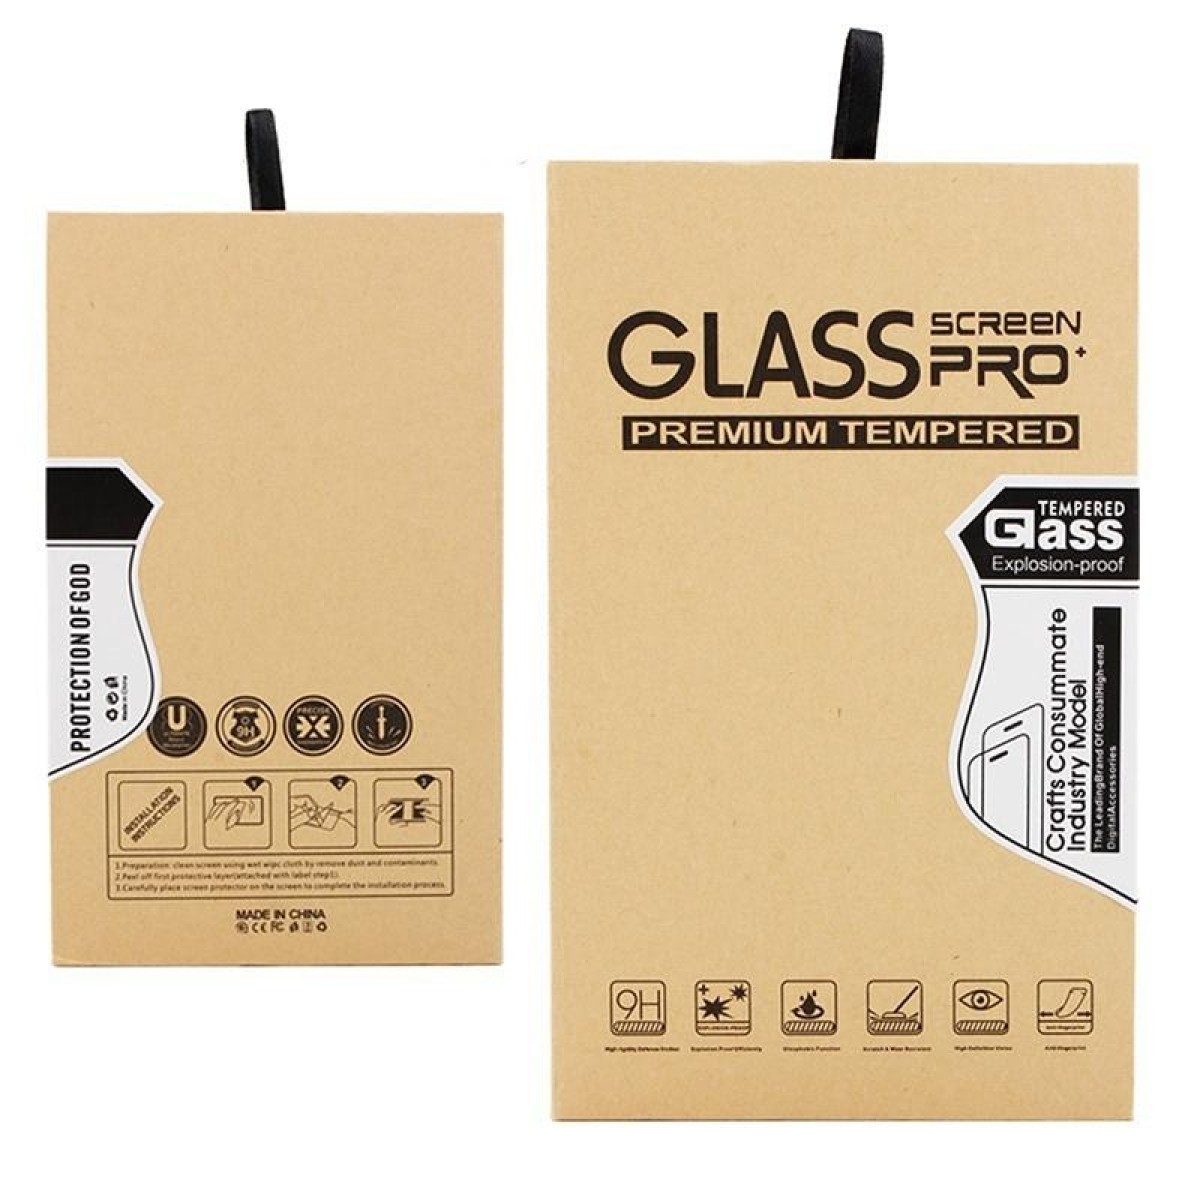 12.5 inch Laptop Universal Screen HD Tempered Glass Protective Film, Size: 27.7 x 15.6cm